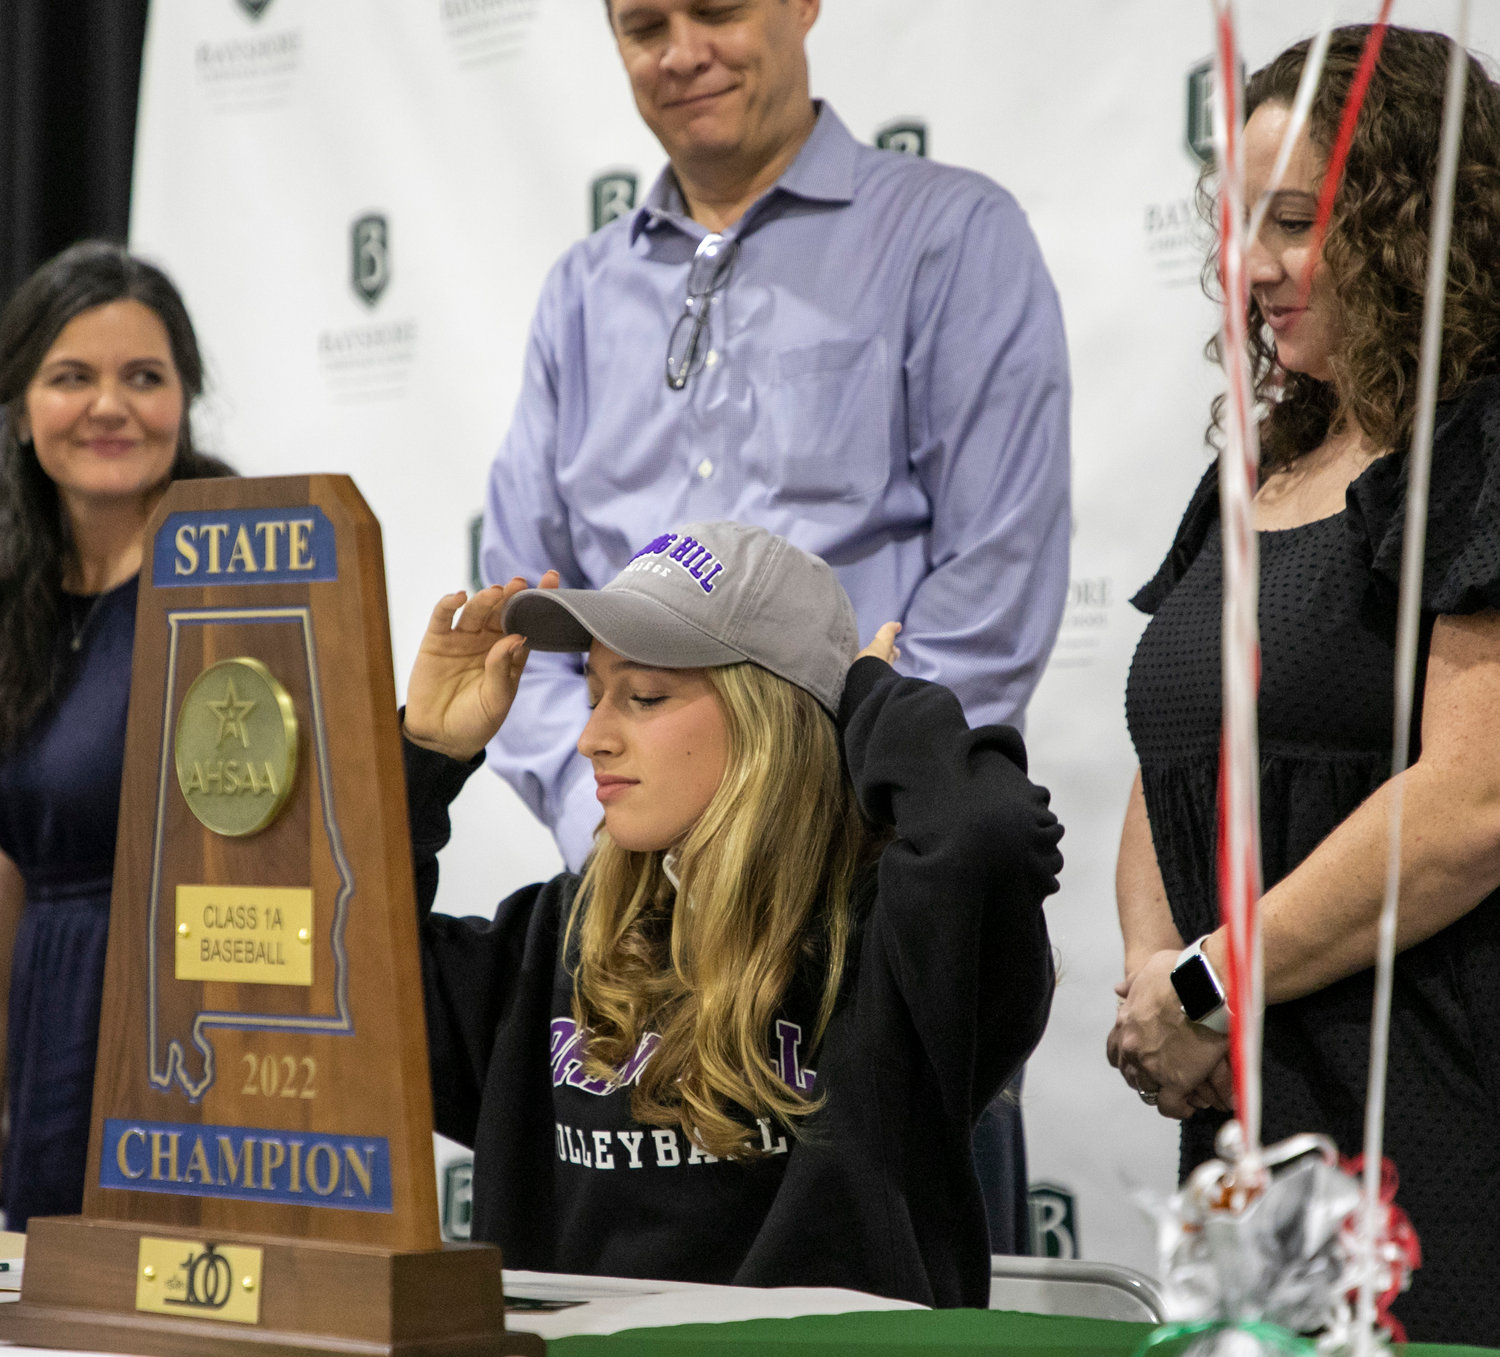 Ashlyn Whiteside dons the cap of her new volleyball team after she signed her National Letter of Intent to join the Spring Hill Badgers’ indoor and beach volleyball squads at a Nov. 30 signing ceremony at Bayshore Christian School. The two-time all-state honoree was part of the Eagles’ 2020 state championship squad.